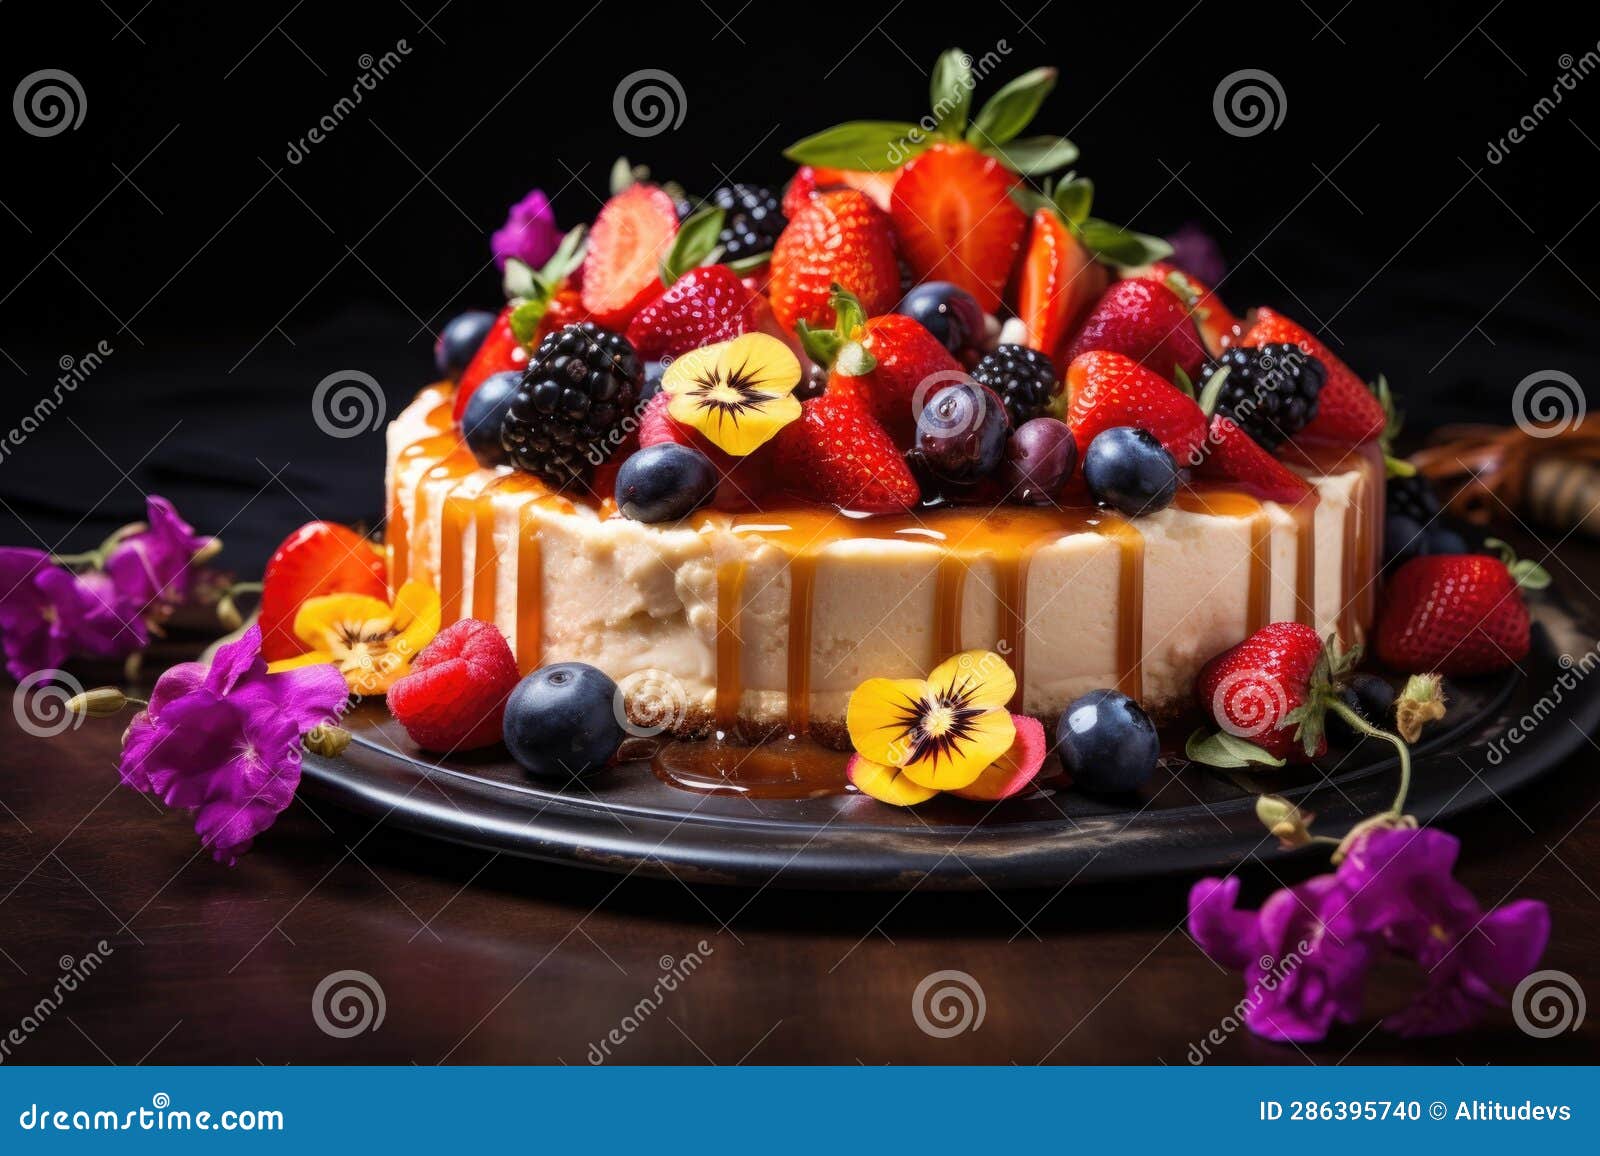 Homemade Cheesecake with Fruit Topping Arrangement Stock Photo - Image ...